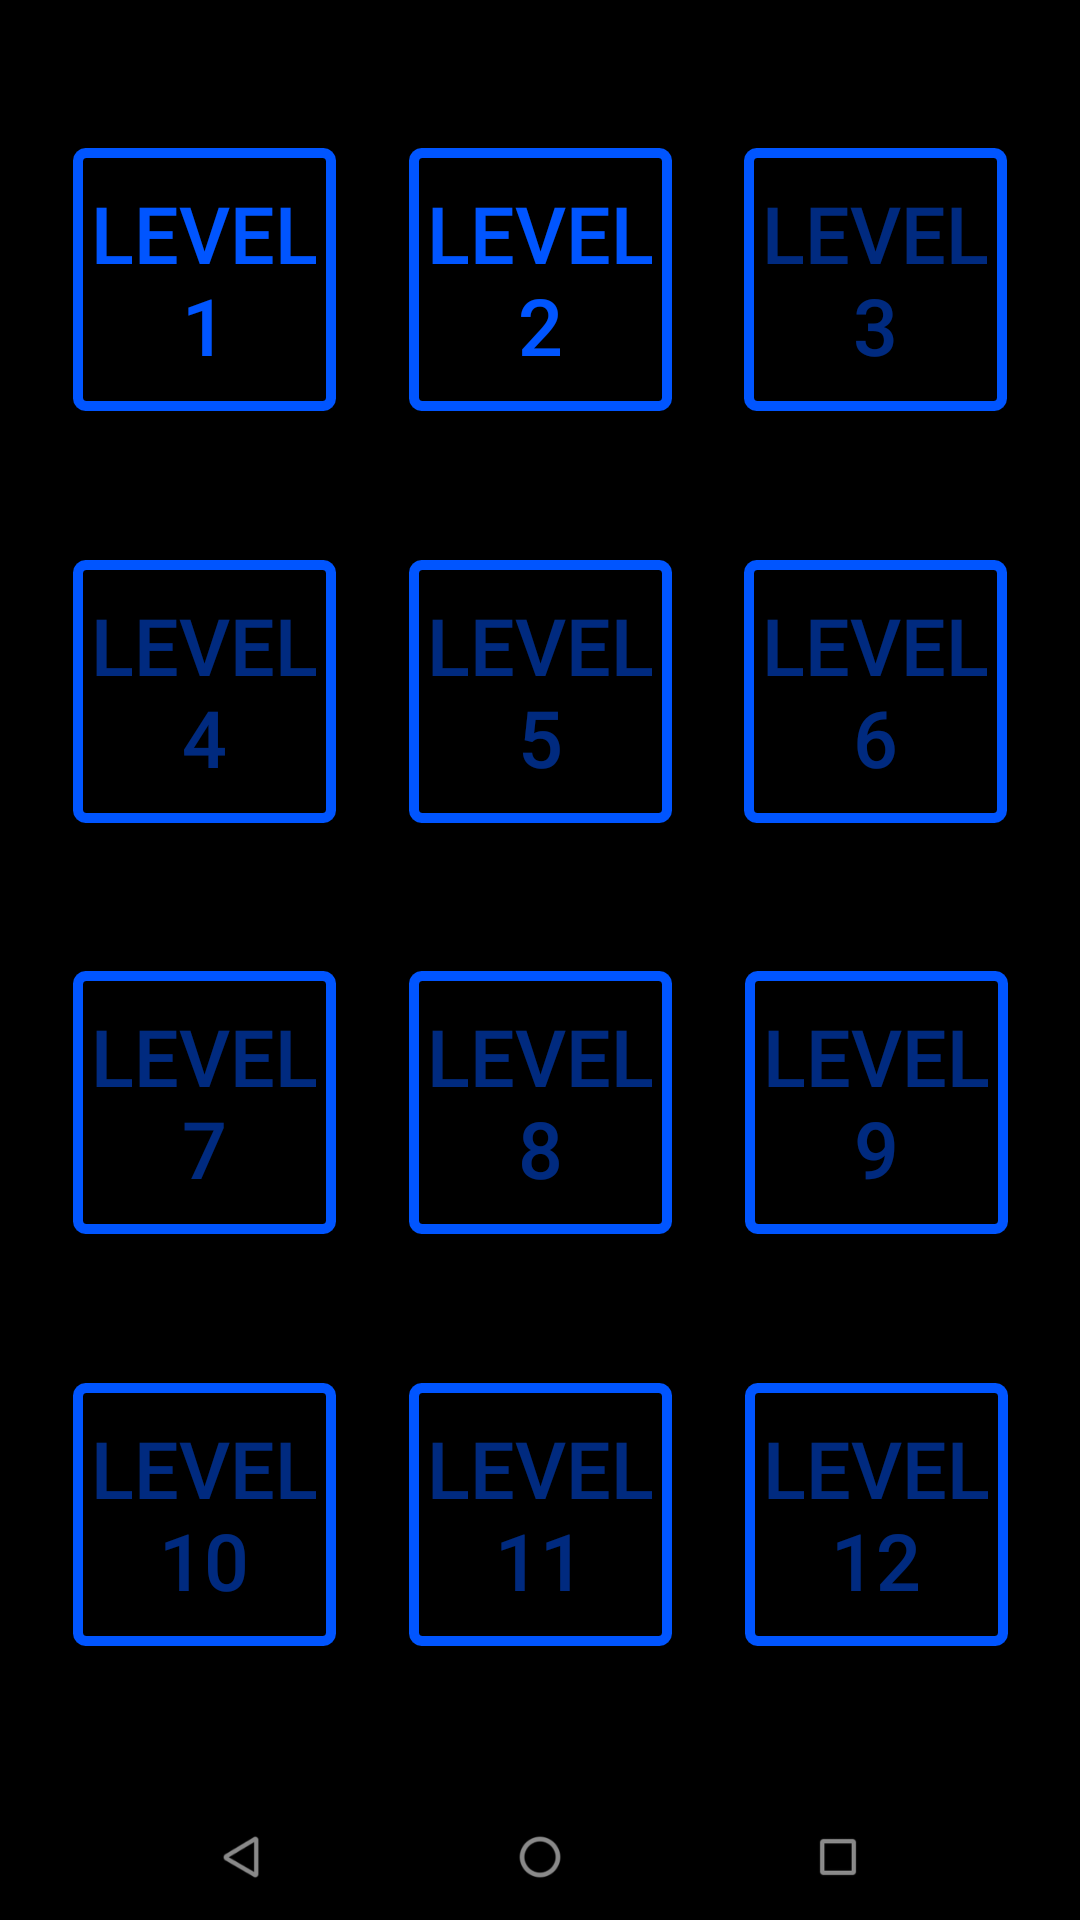 Figure 4 The level selection screen when level 1 has been completed.